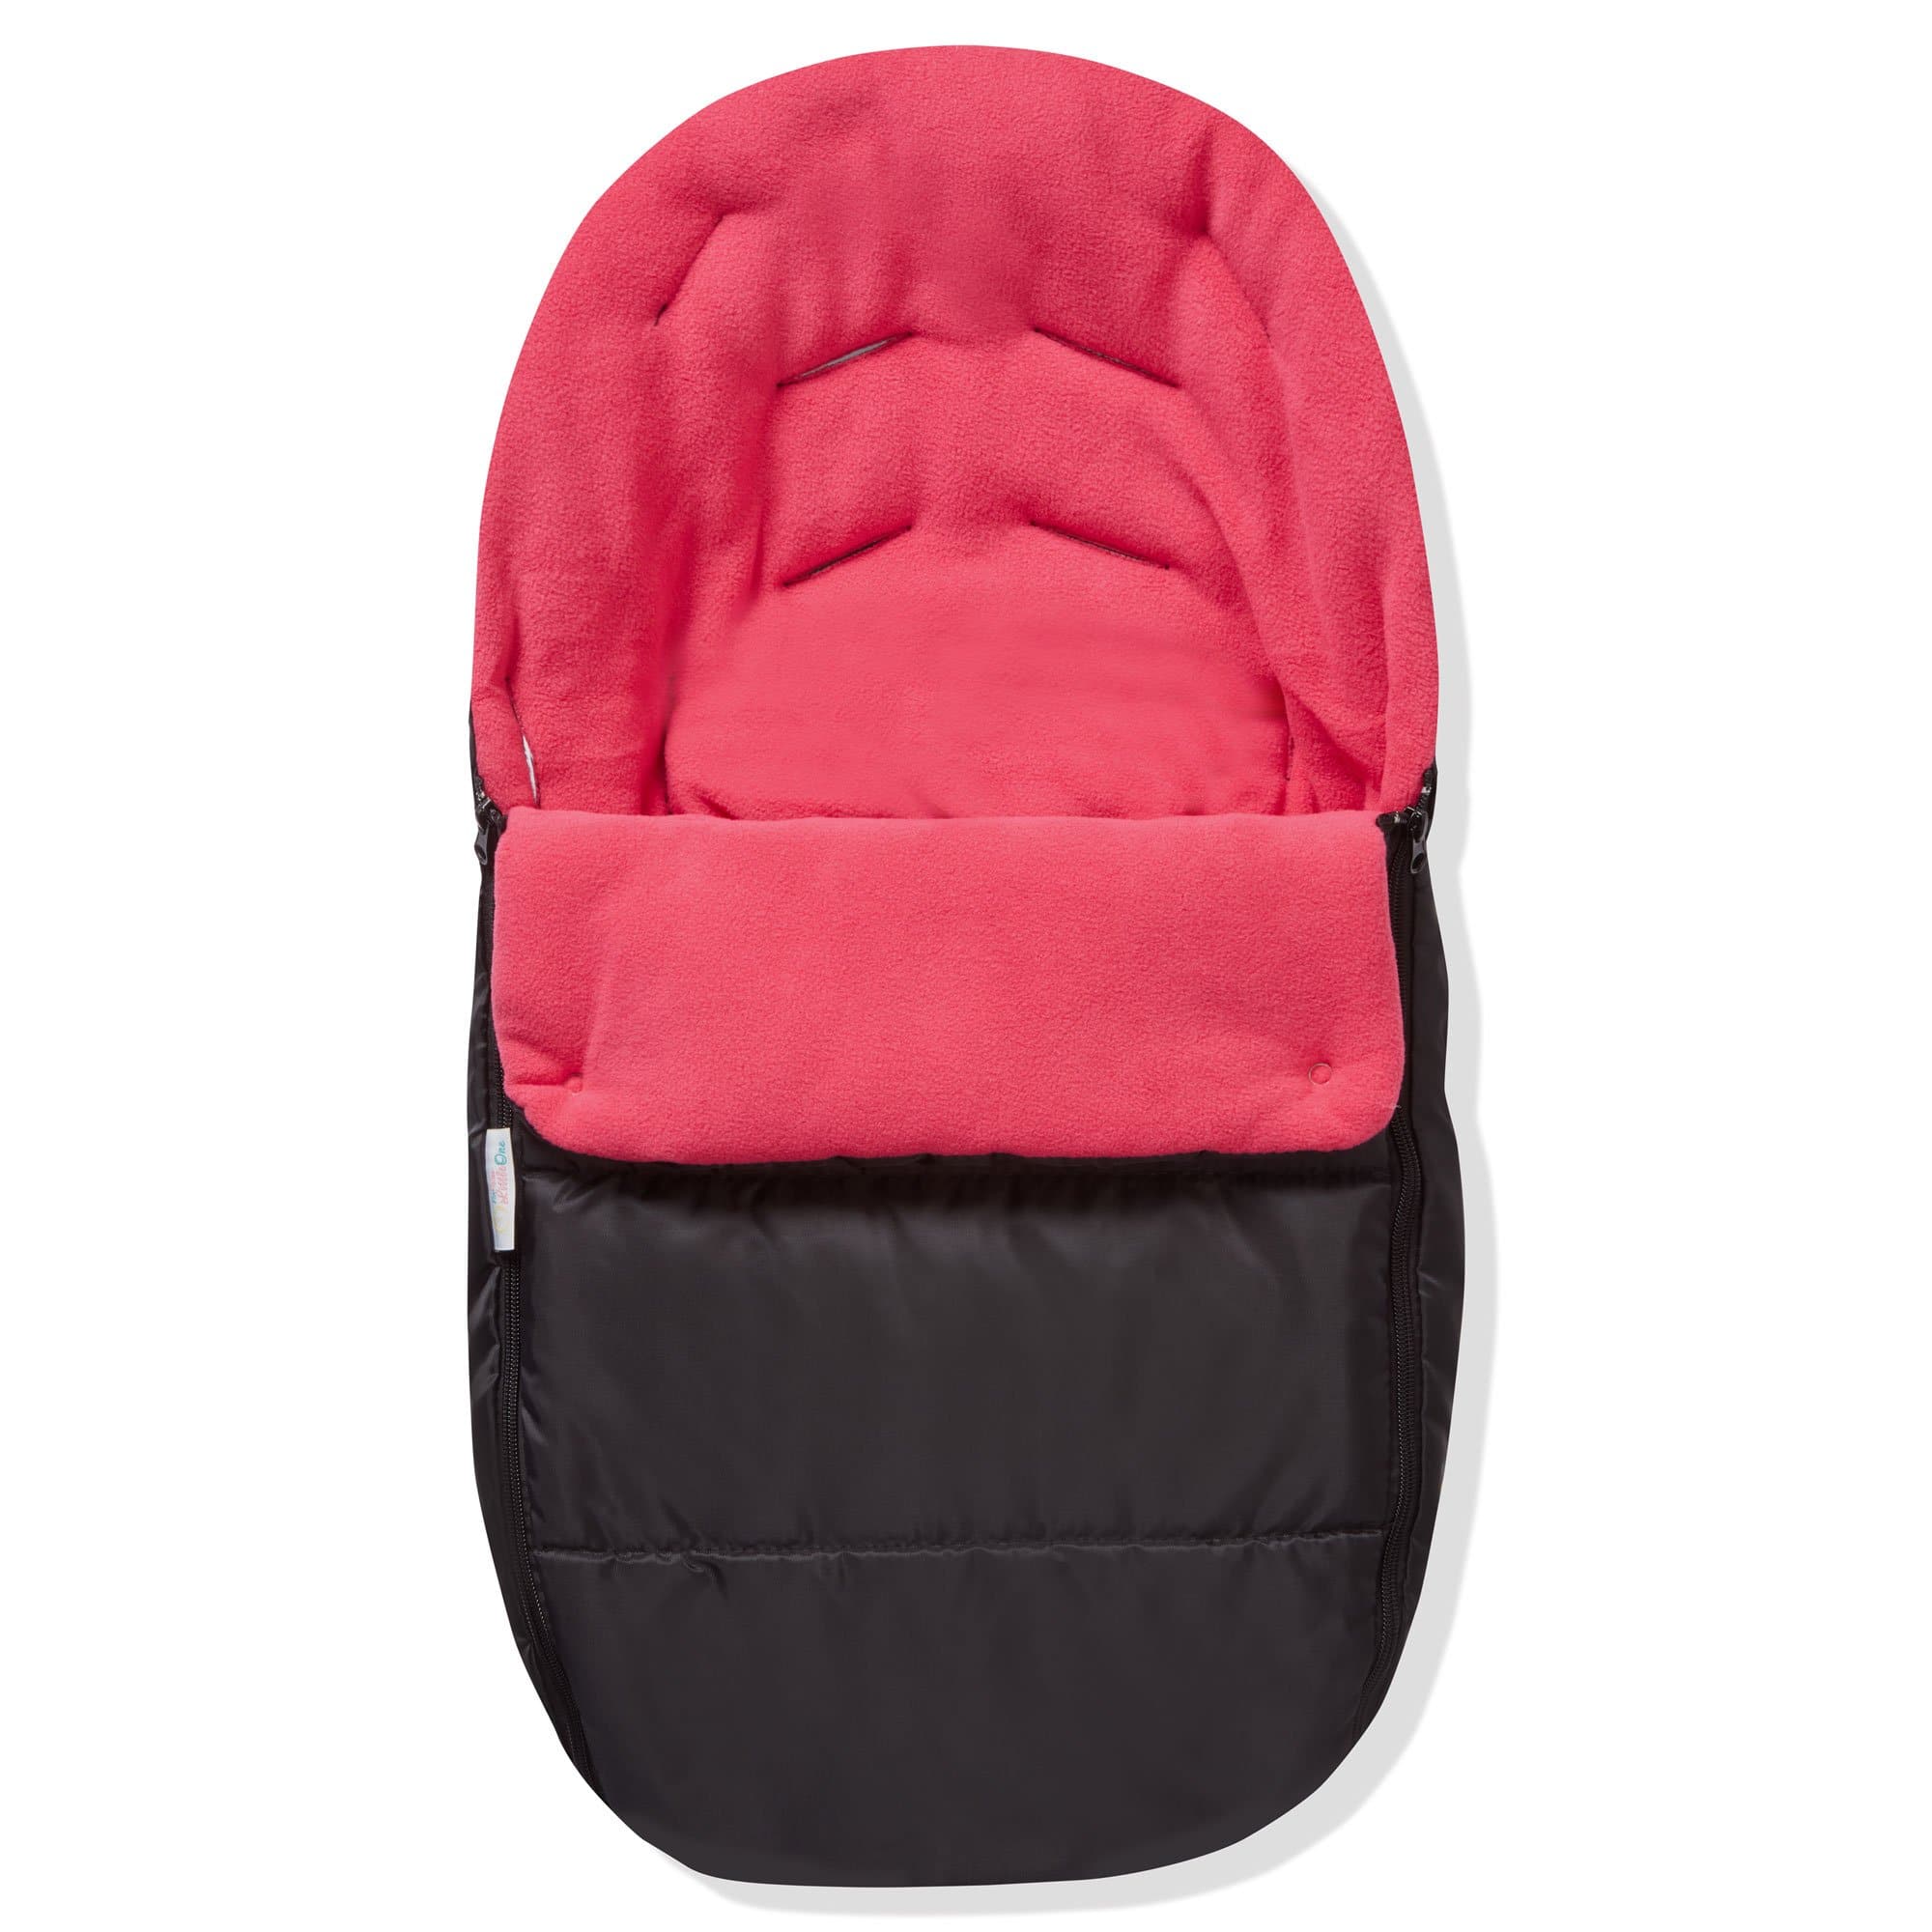 Premium Car Seat Footmuff / Cosy Toes Compatible with Kinderkraft - Pink Rose / Fits All Models | For Your Little One